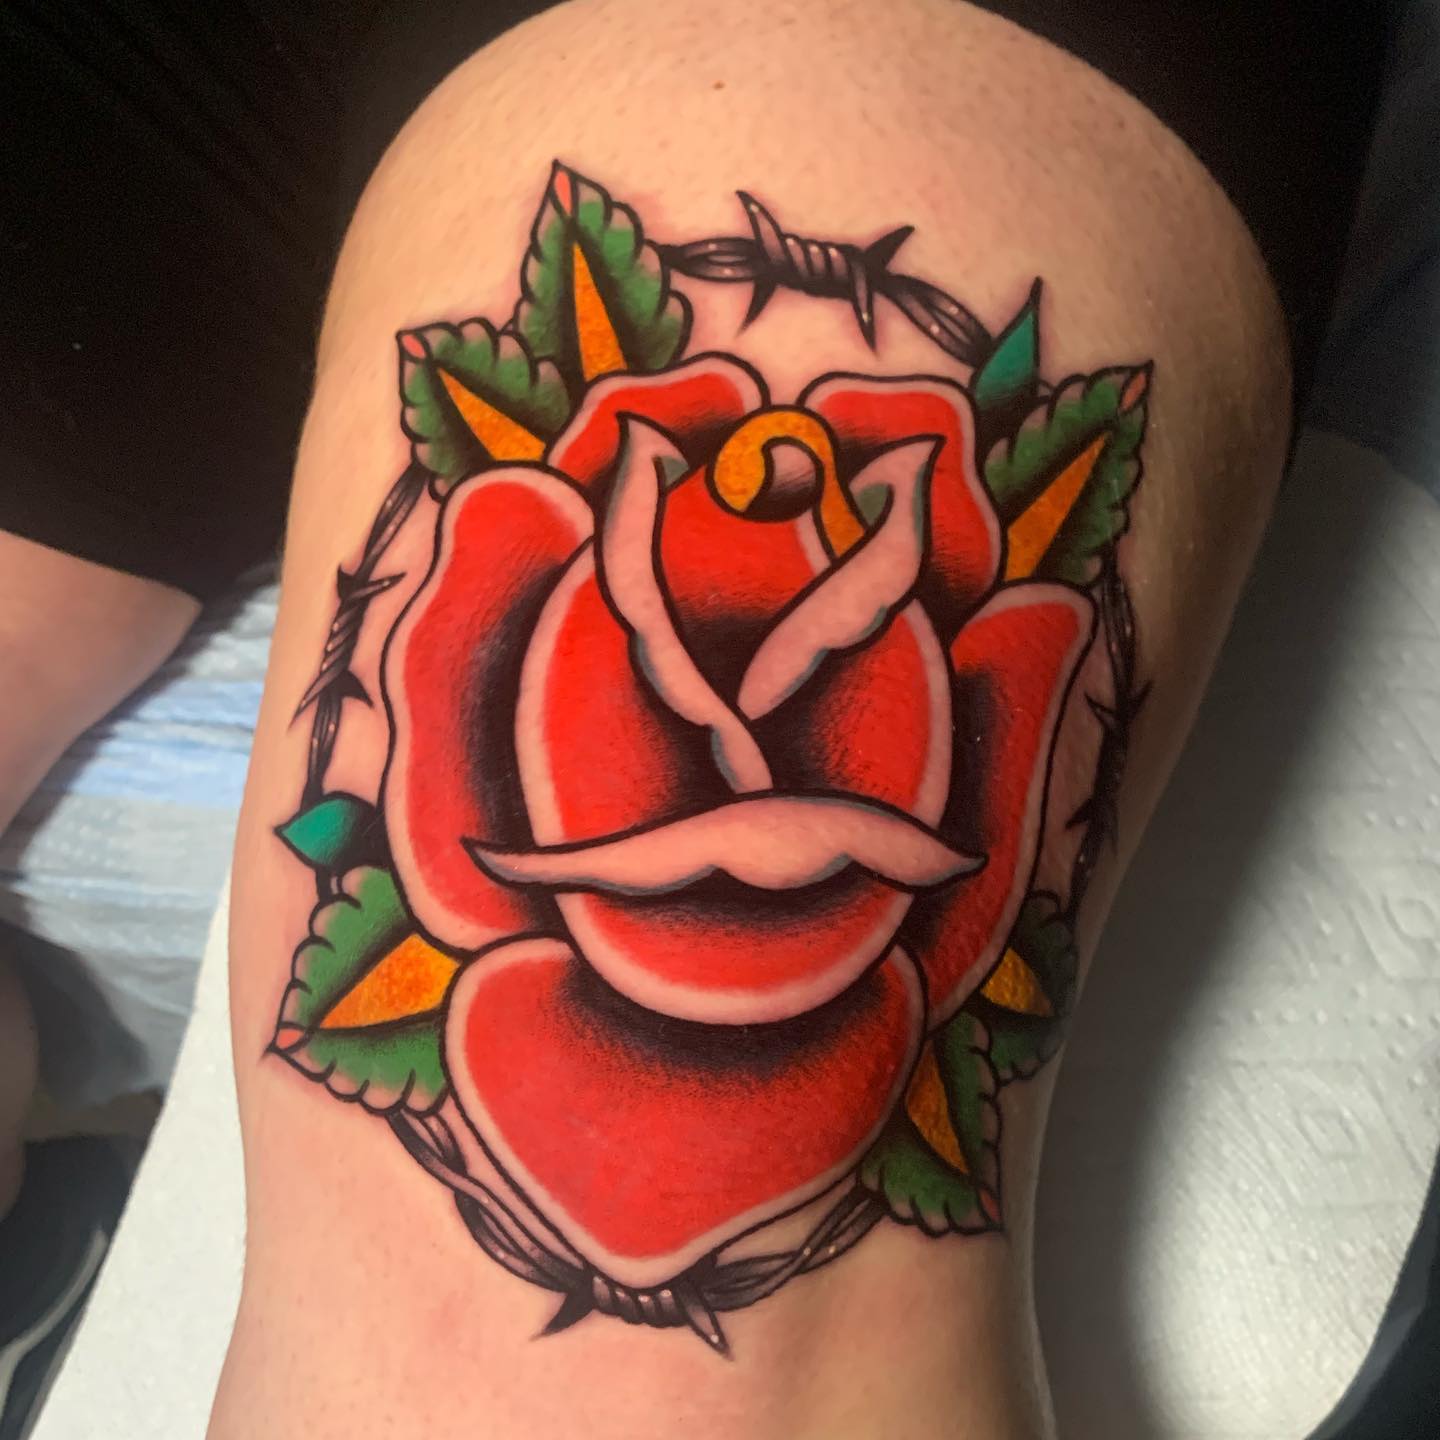 Roses have been a popular choice thought the ages for those who want to get a tattoo. They are the symbol of beauty and this type of rose has an old school tattoo vibe. If you like this style, matching it with a barbed wire can be a wonderful idea to rock. Protect your beauty with wires.